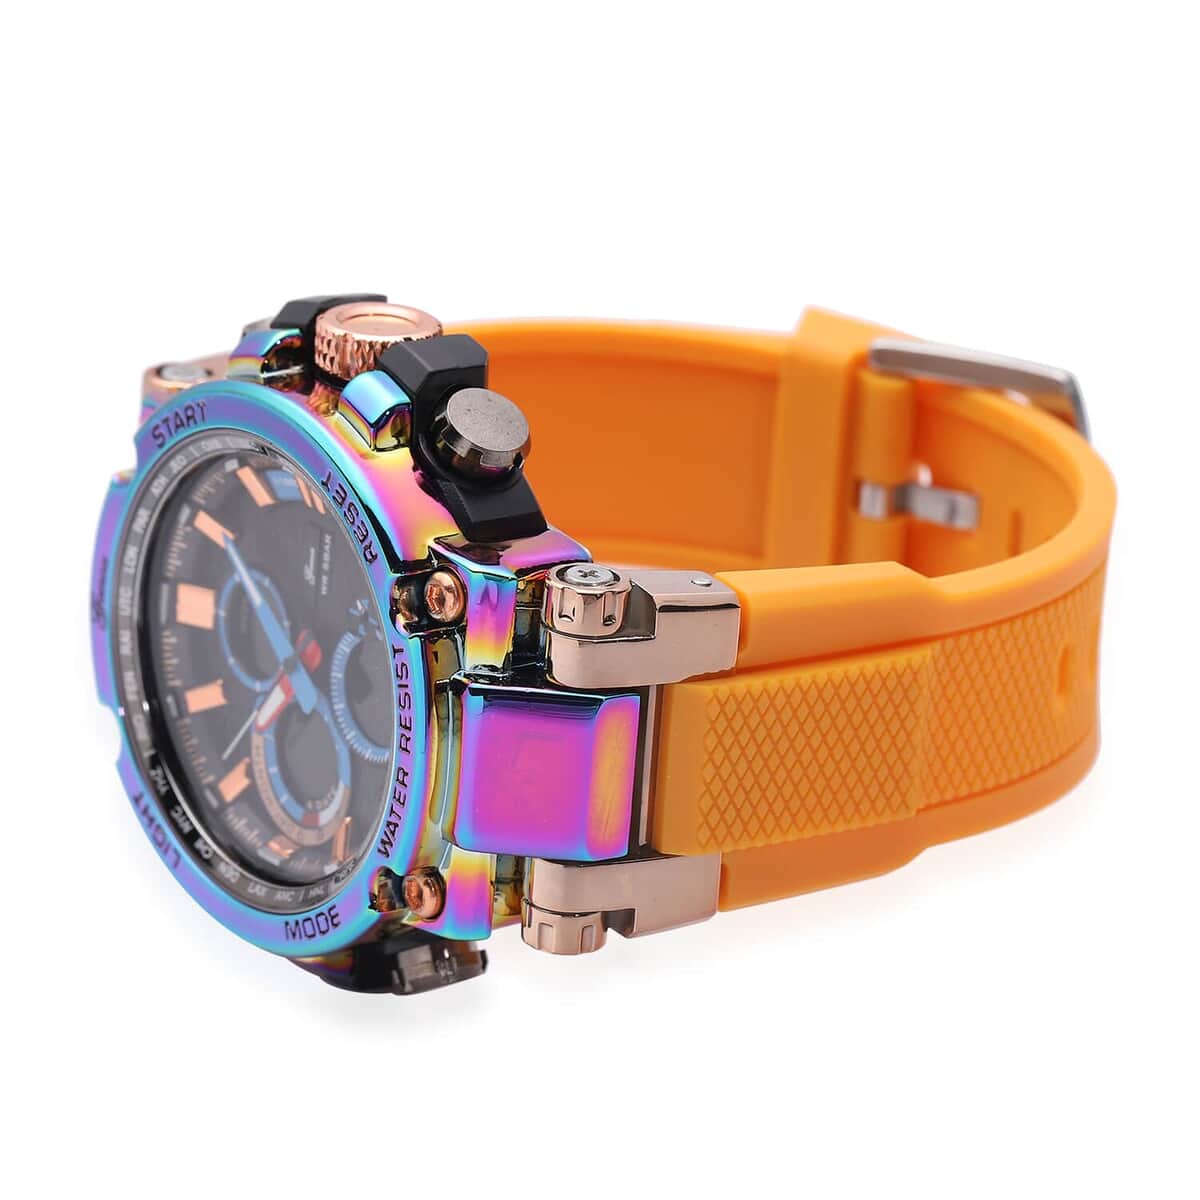 Genoa Japanese and Electronic Movement Watch, Multifunctional Key Watch with Orange Silicone Strap, Casual Watch For Men, Best Everyday Luxury Watch, Analogue Watch image number 4